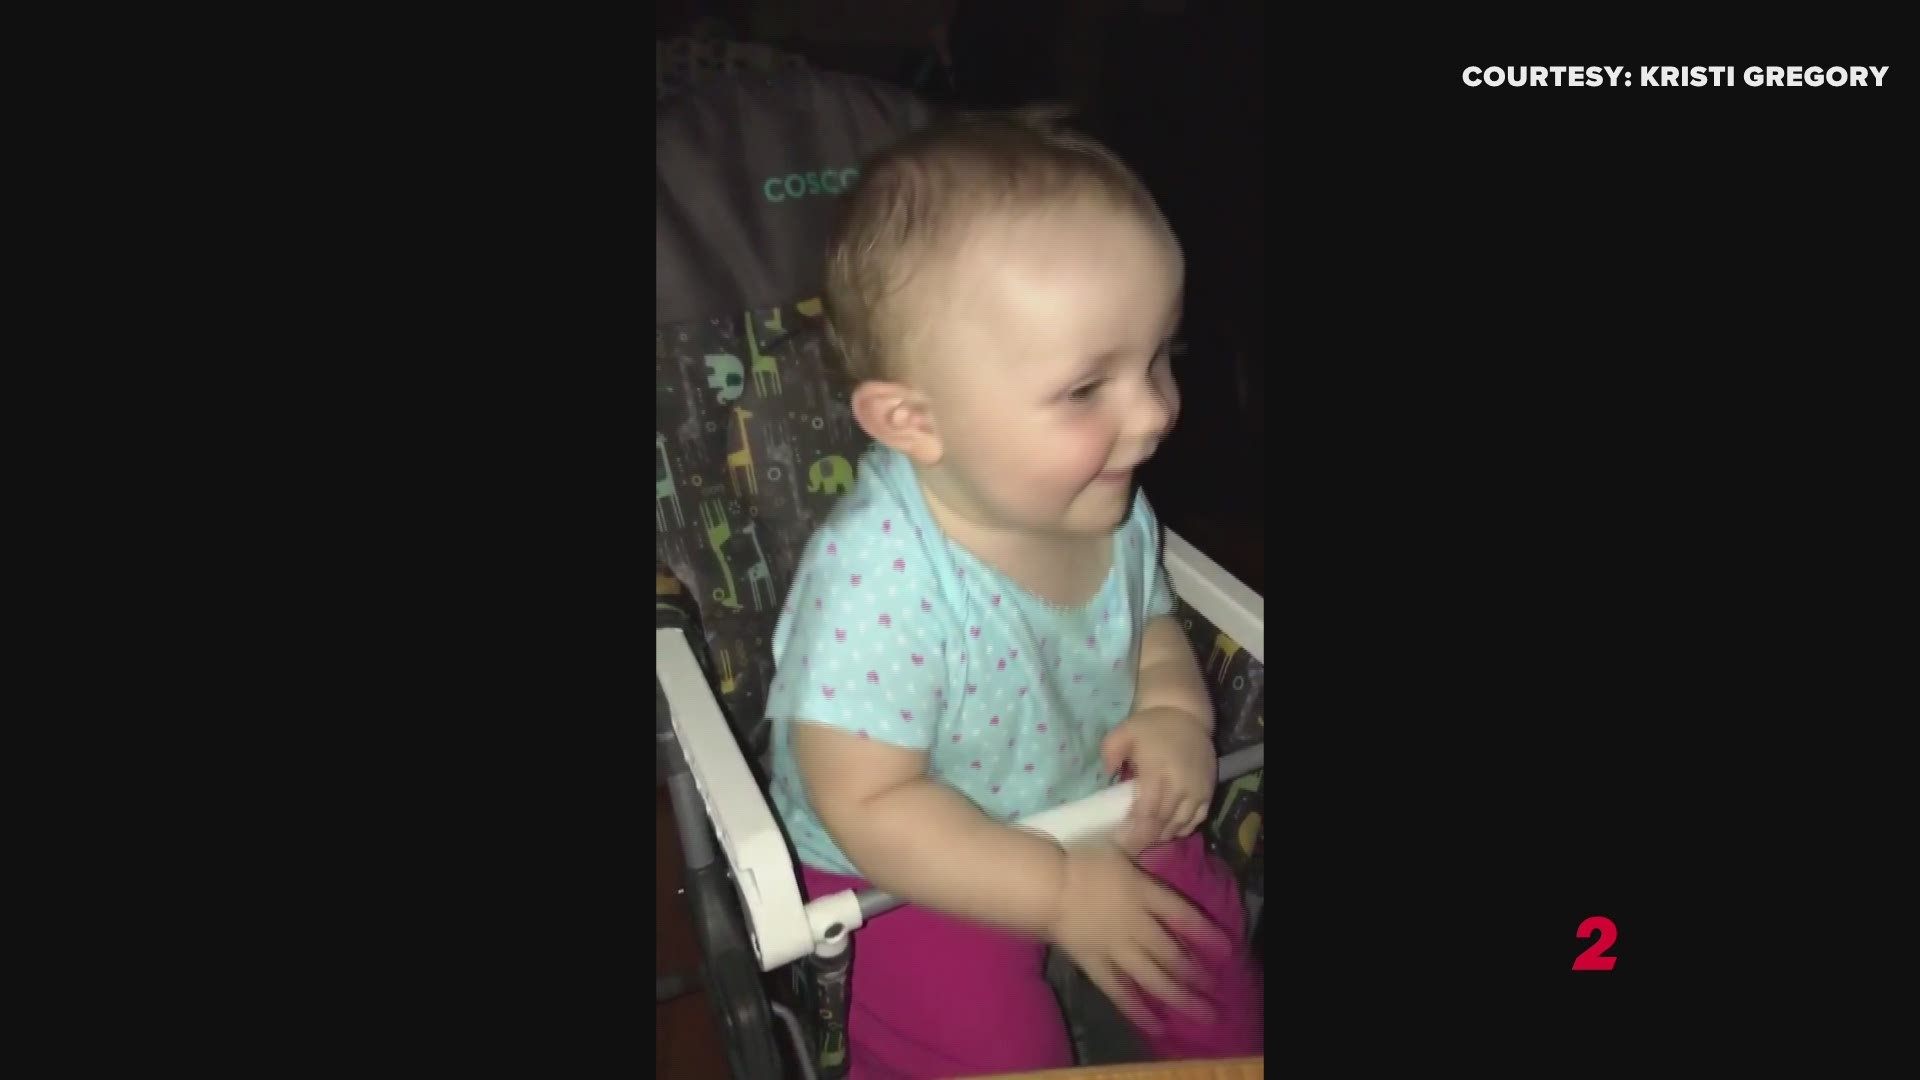 Kristi Gregory tweeted WFMY News 2 video of her adorable little one, Harper, dancing and giggling during a power outage.